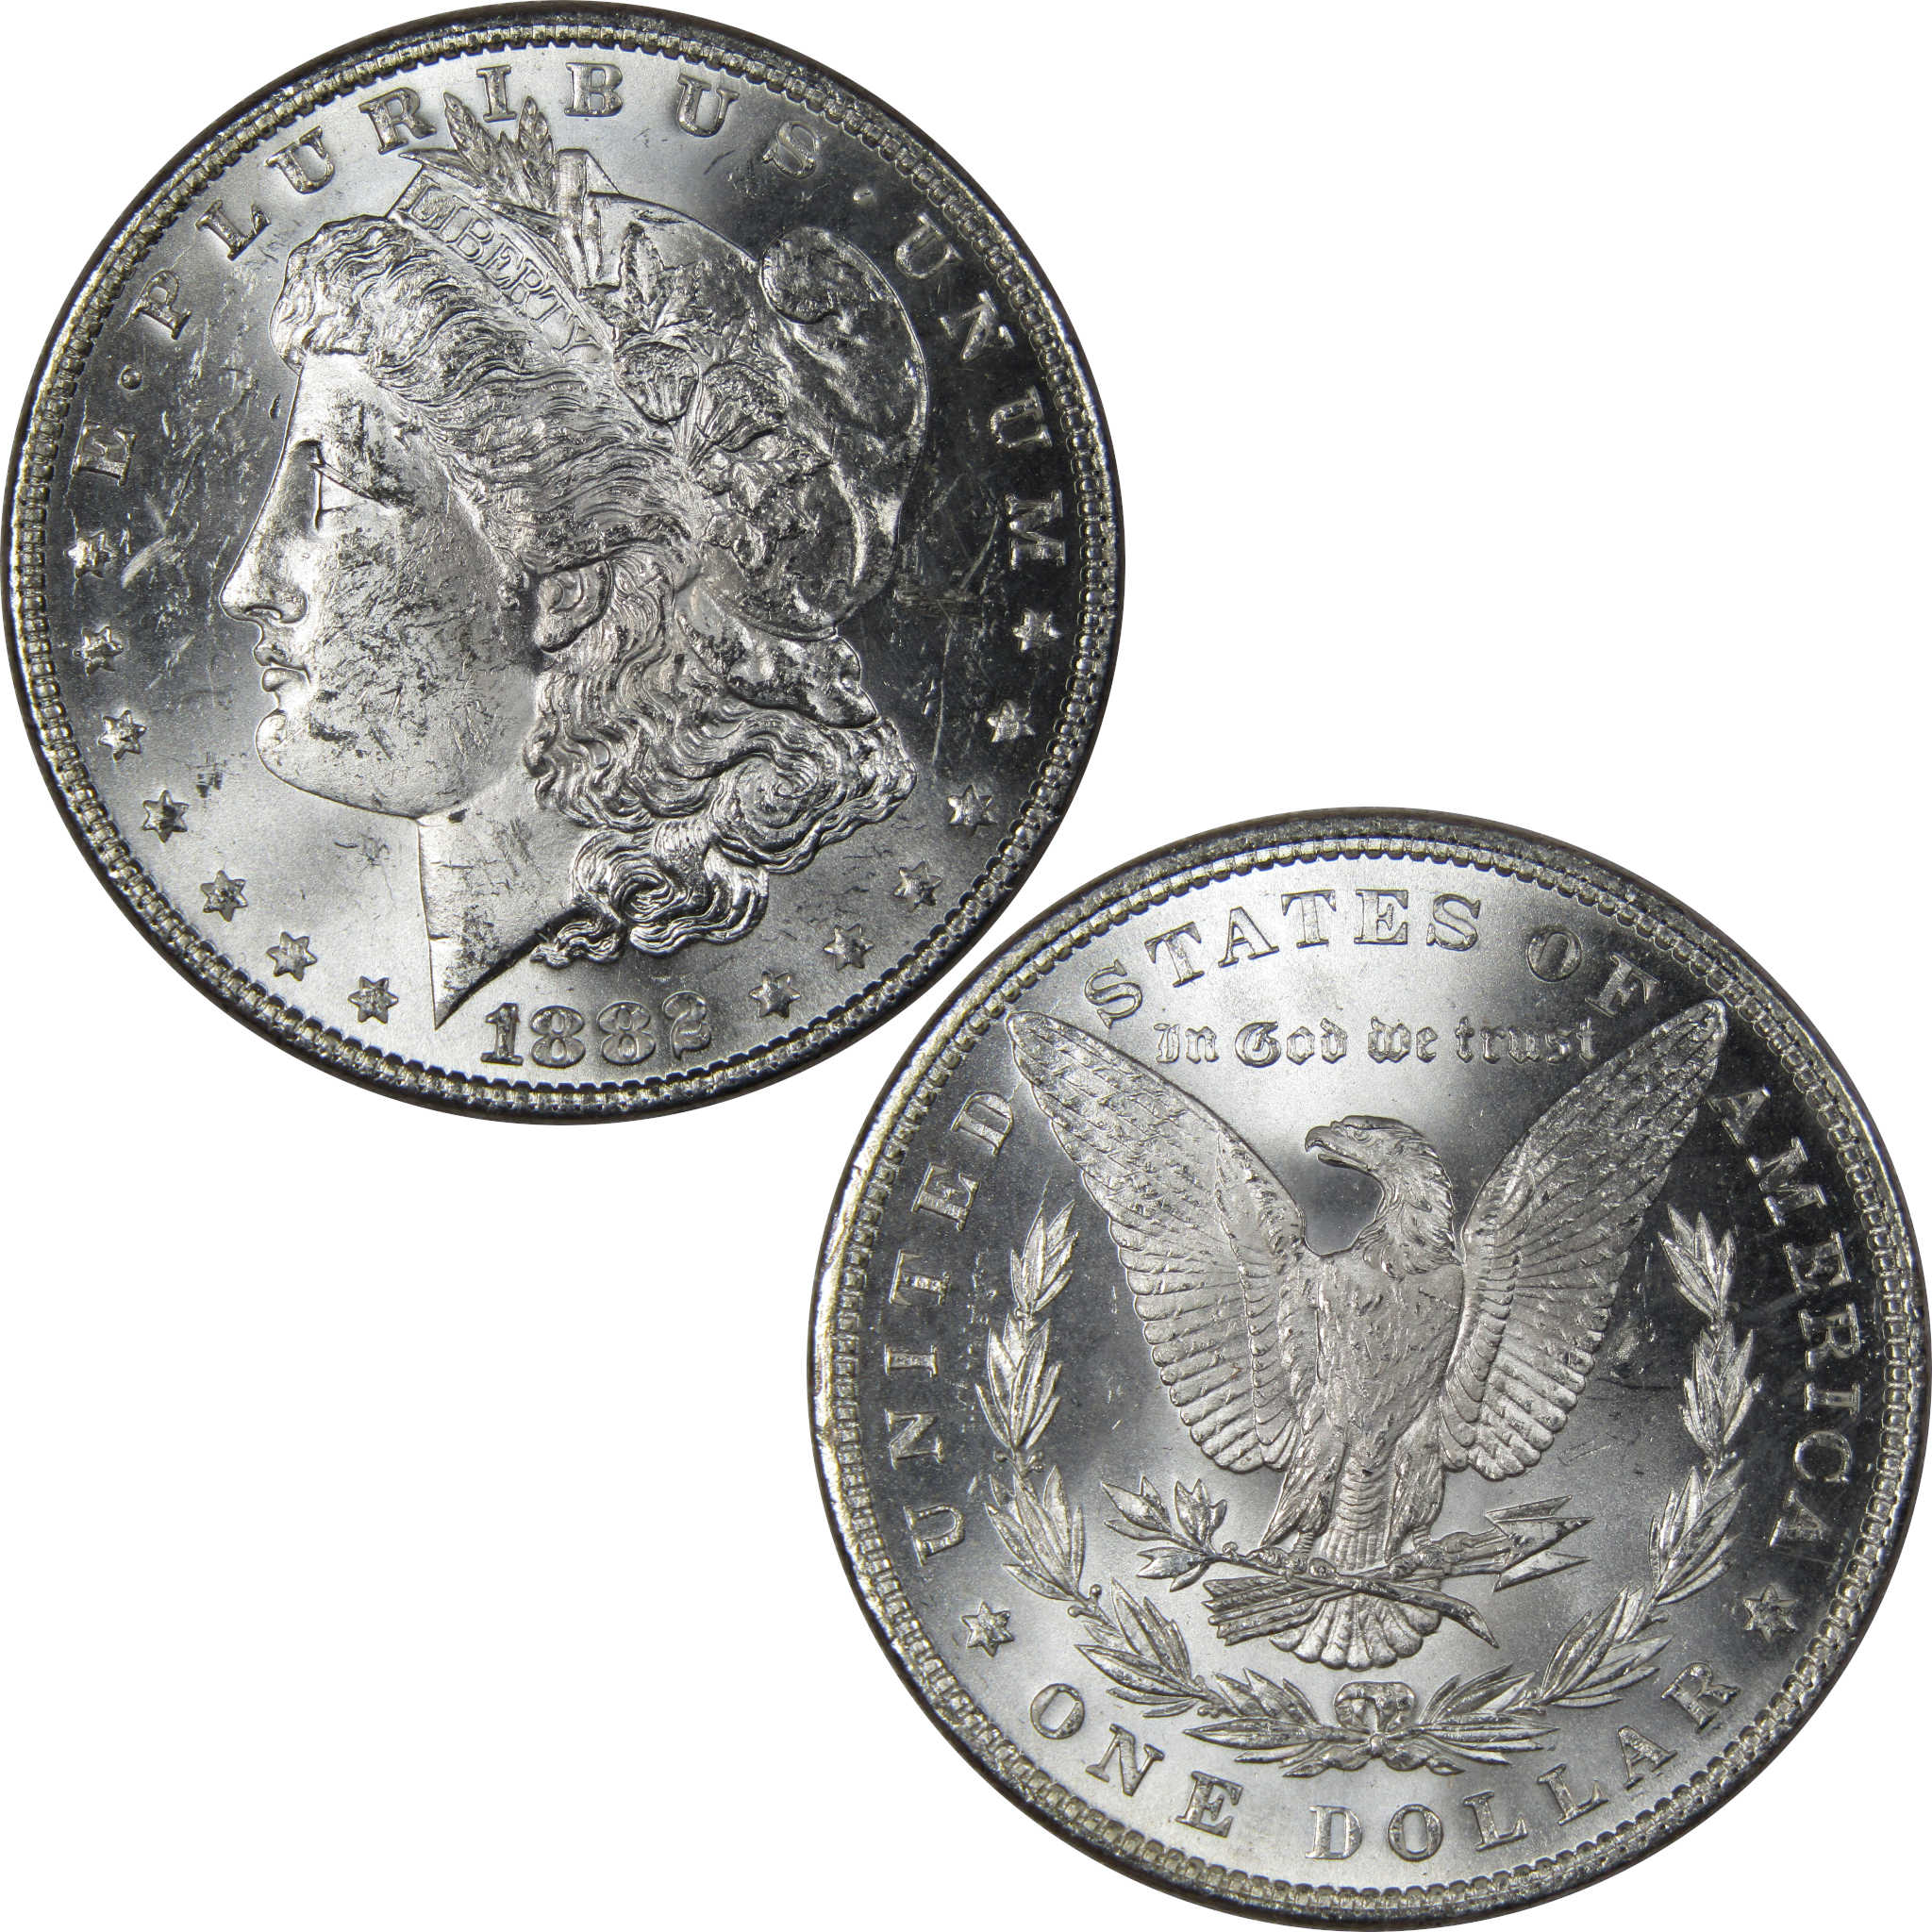 1882 Morgan Dollar BU Uncirculated Mint State 90% Silver SKU:IPC9695 - Morgan coin - Morgan silver dollar - Morgan silver dollar for sale - Profile Coins &amp; Collectibles